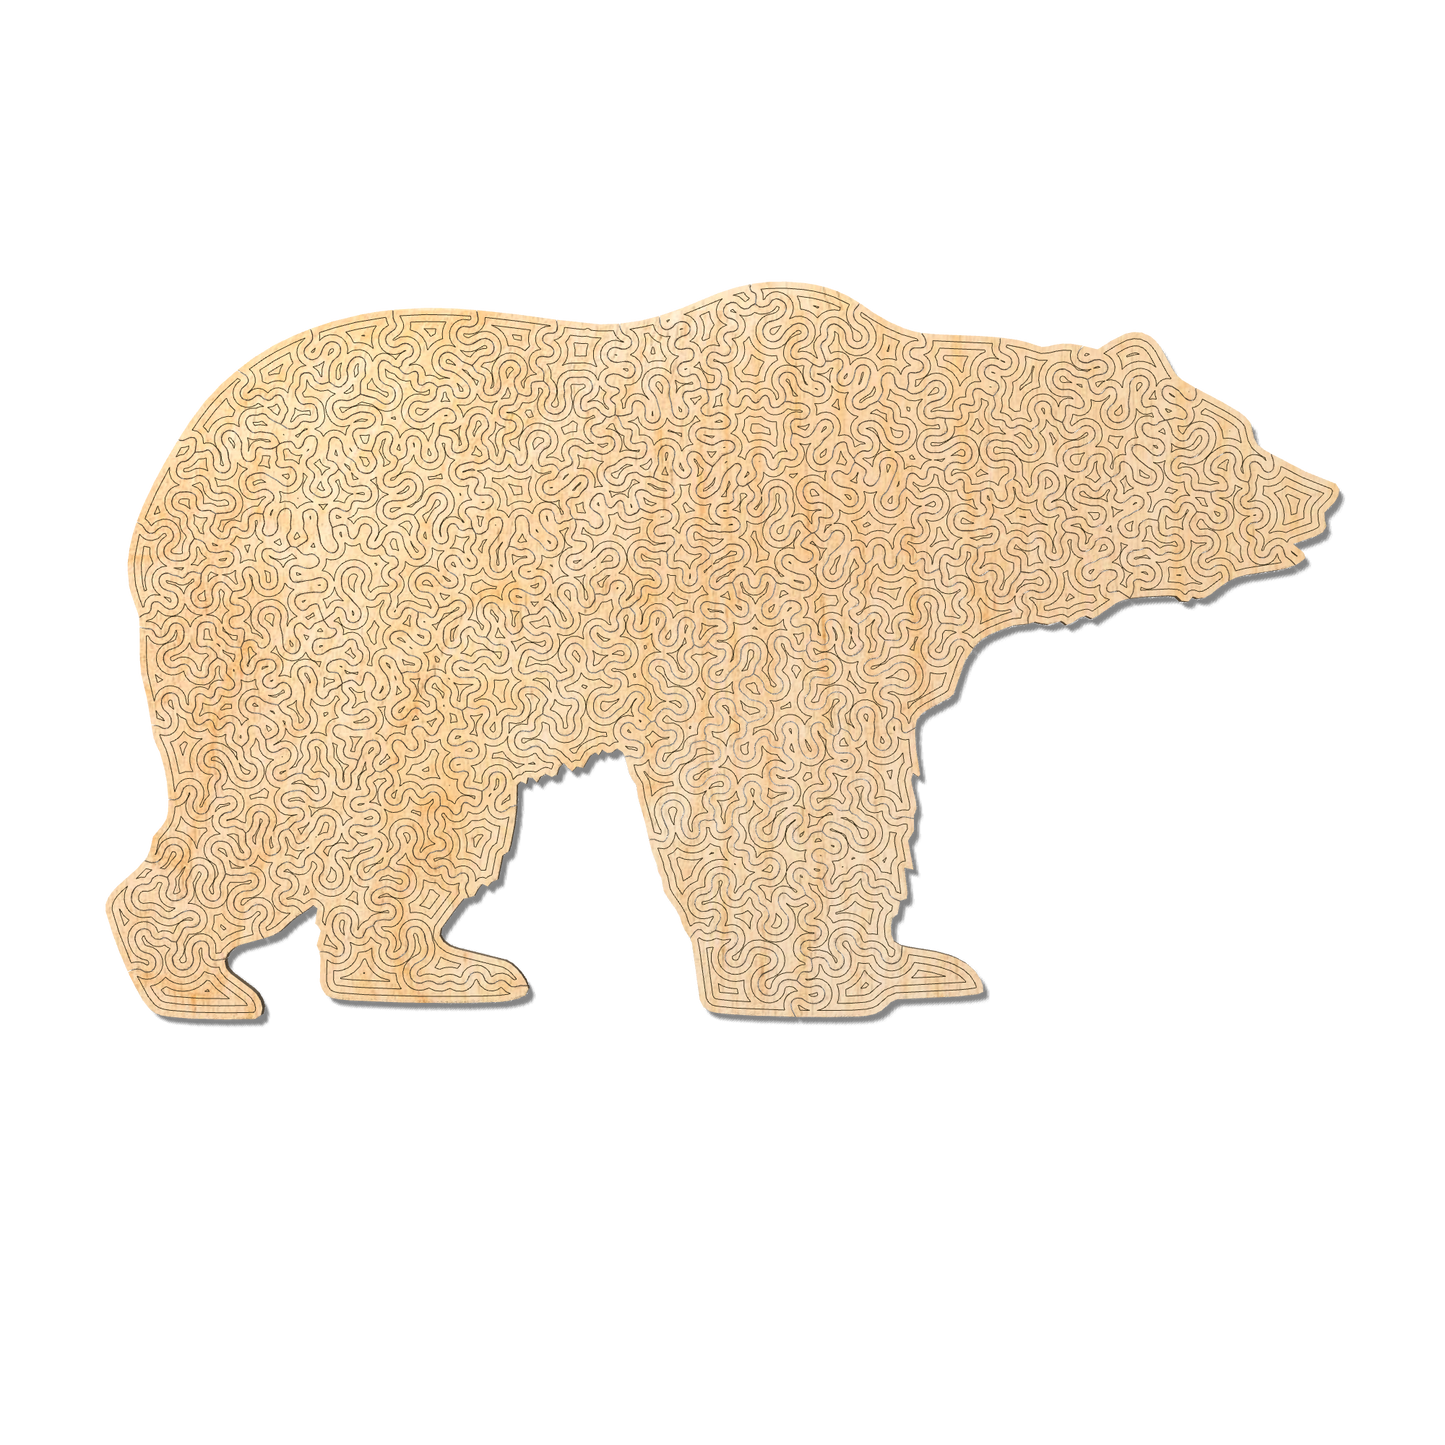 Bear | Wooden Puzzle | Chaos series - 100 pieces